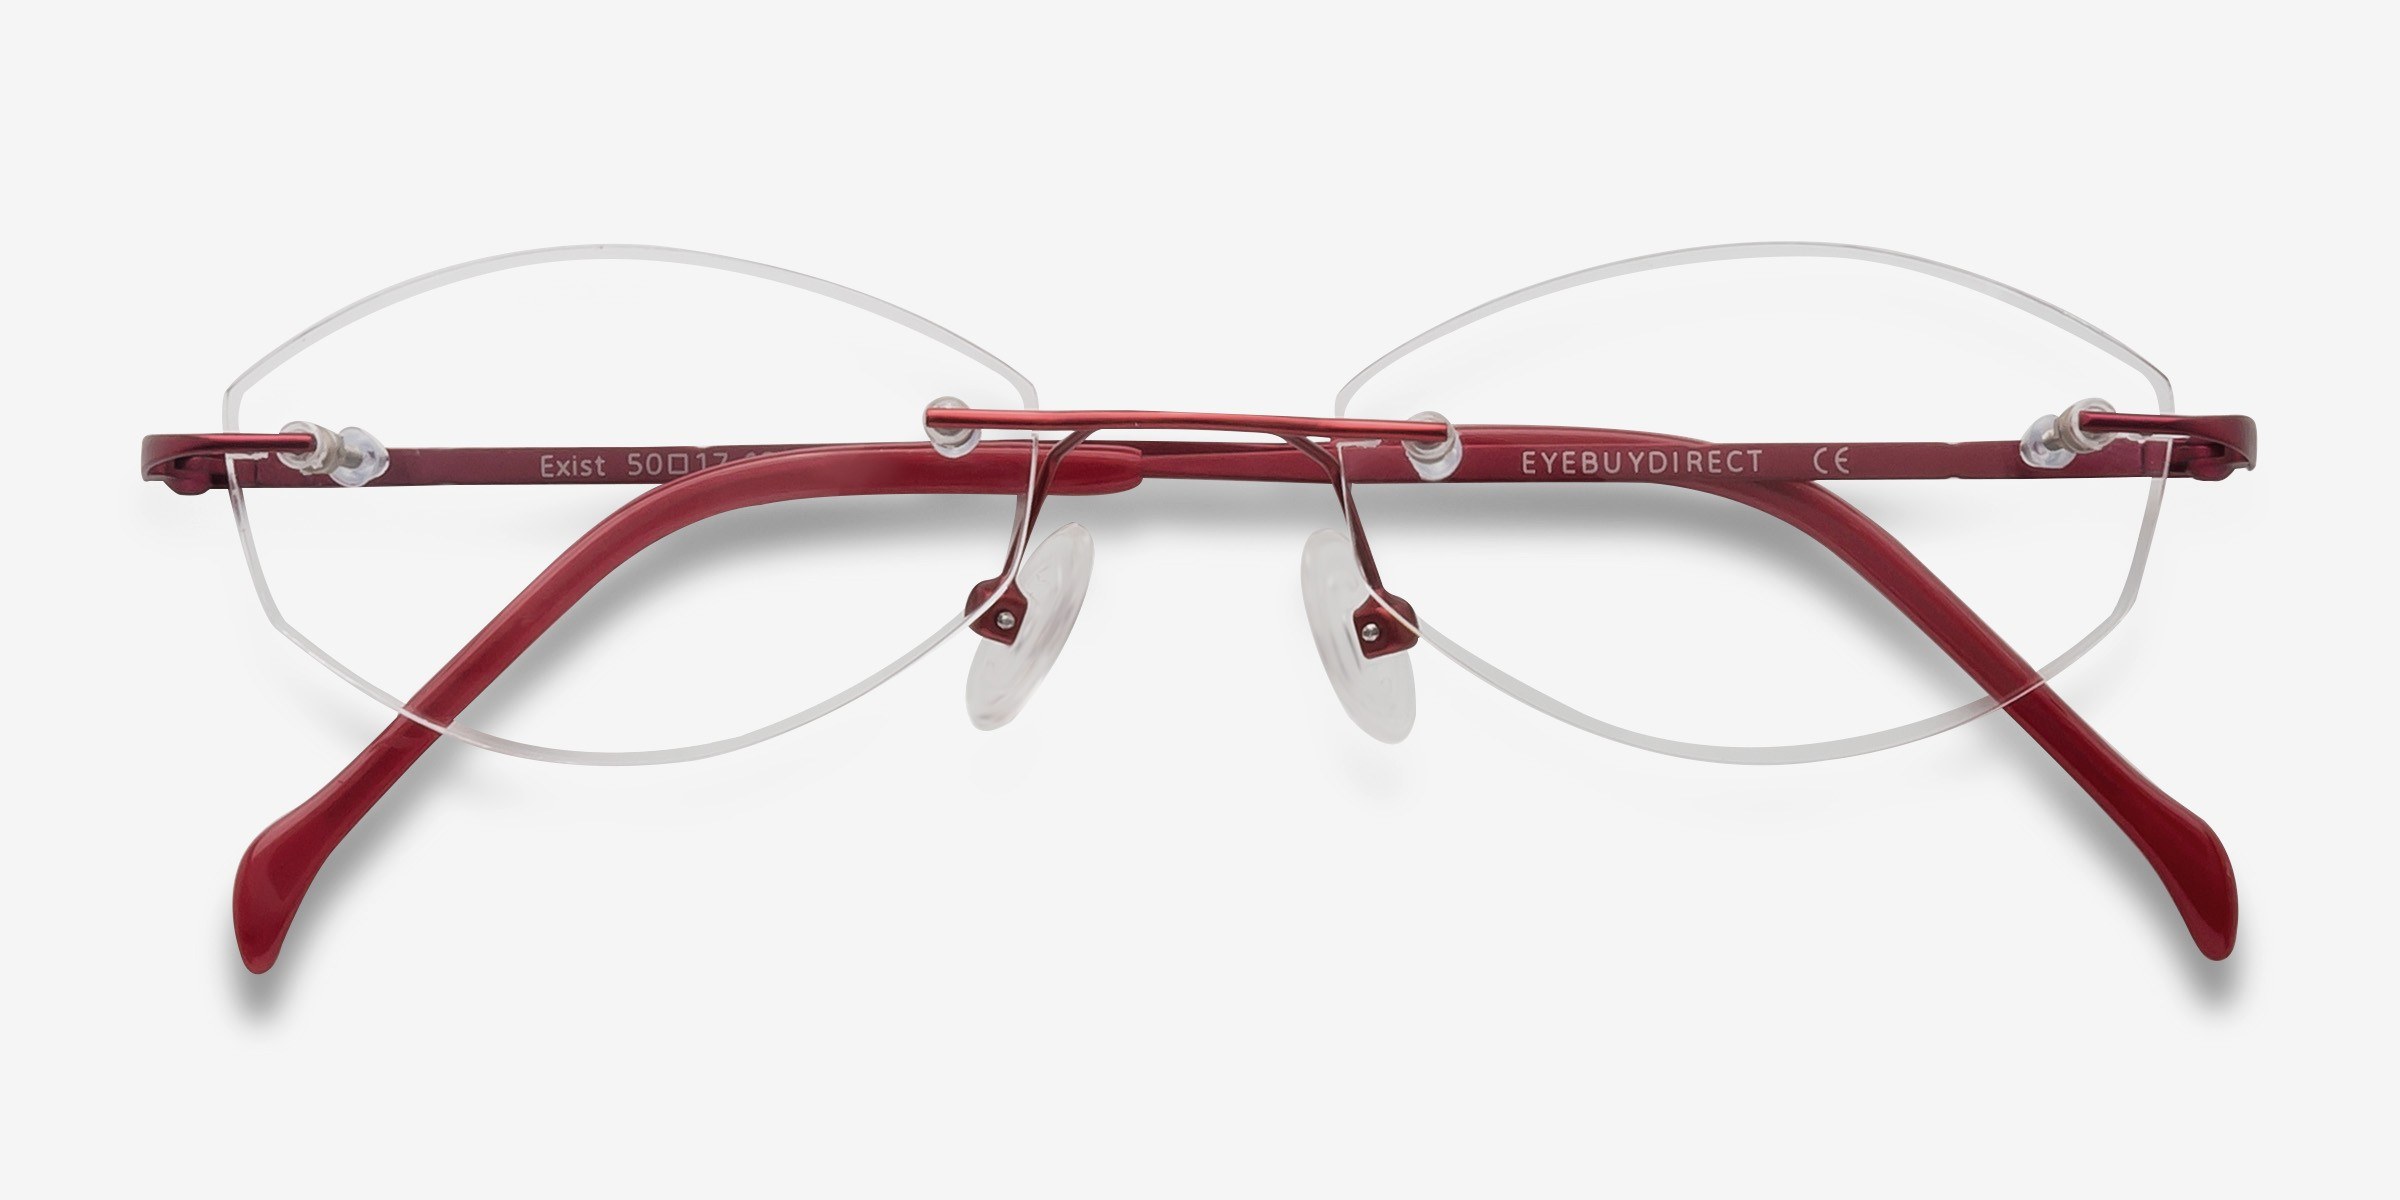 Exist Oval Red Glasses for Women | Eyebuydirect